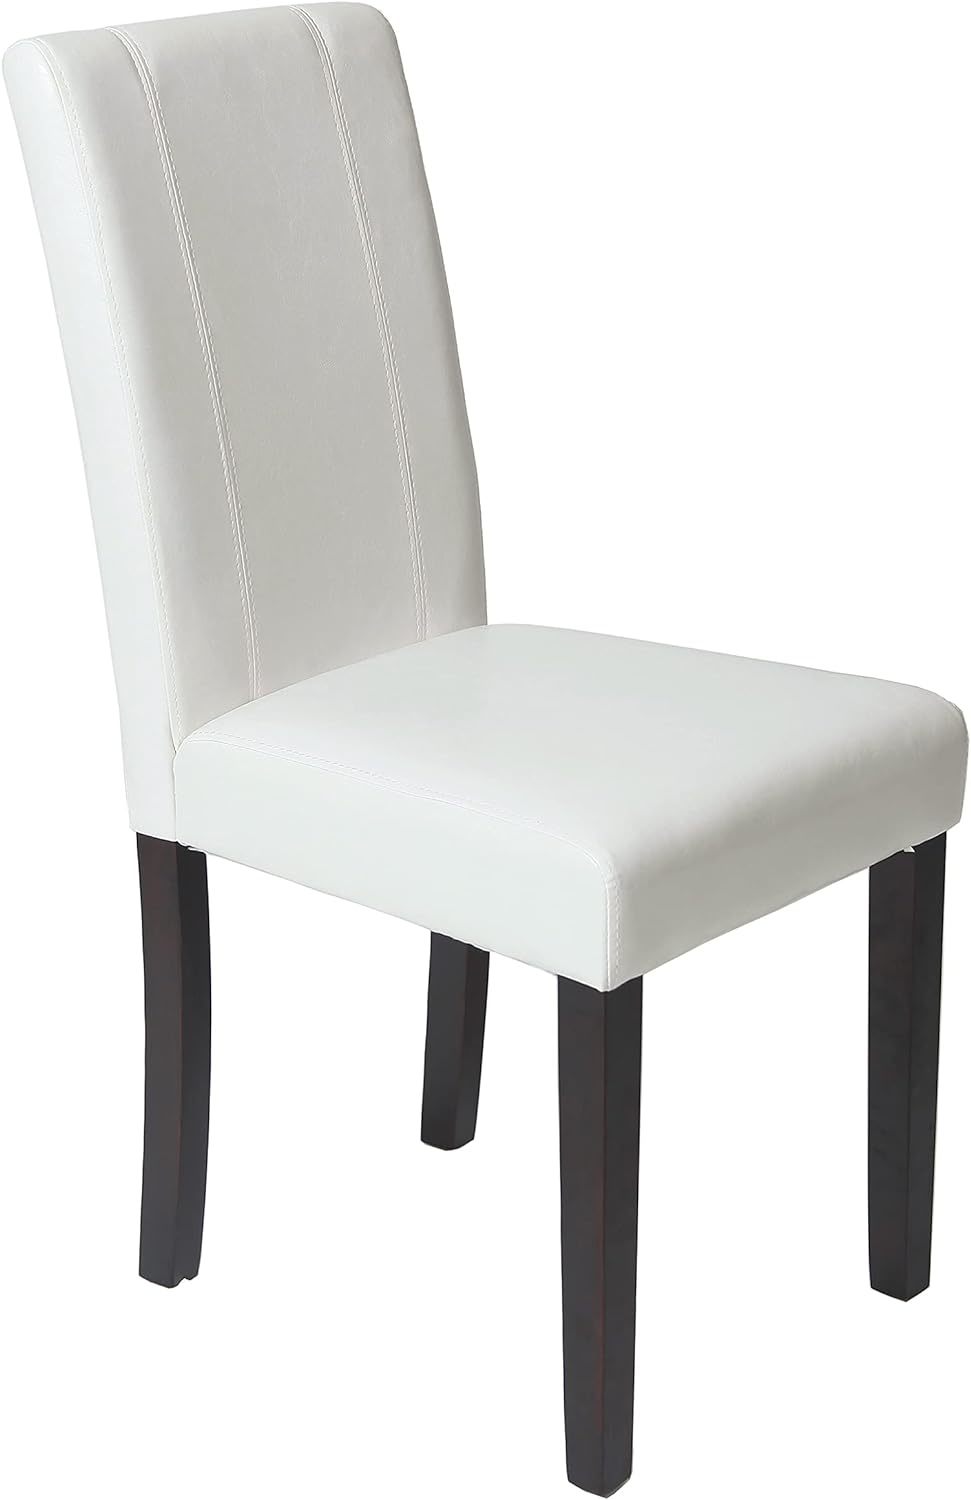 Primary image for Set Of 2 Roundhill Furniture Urban Style Solid Wood Leatherette Padded, White.